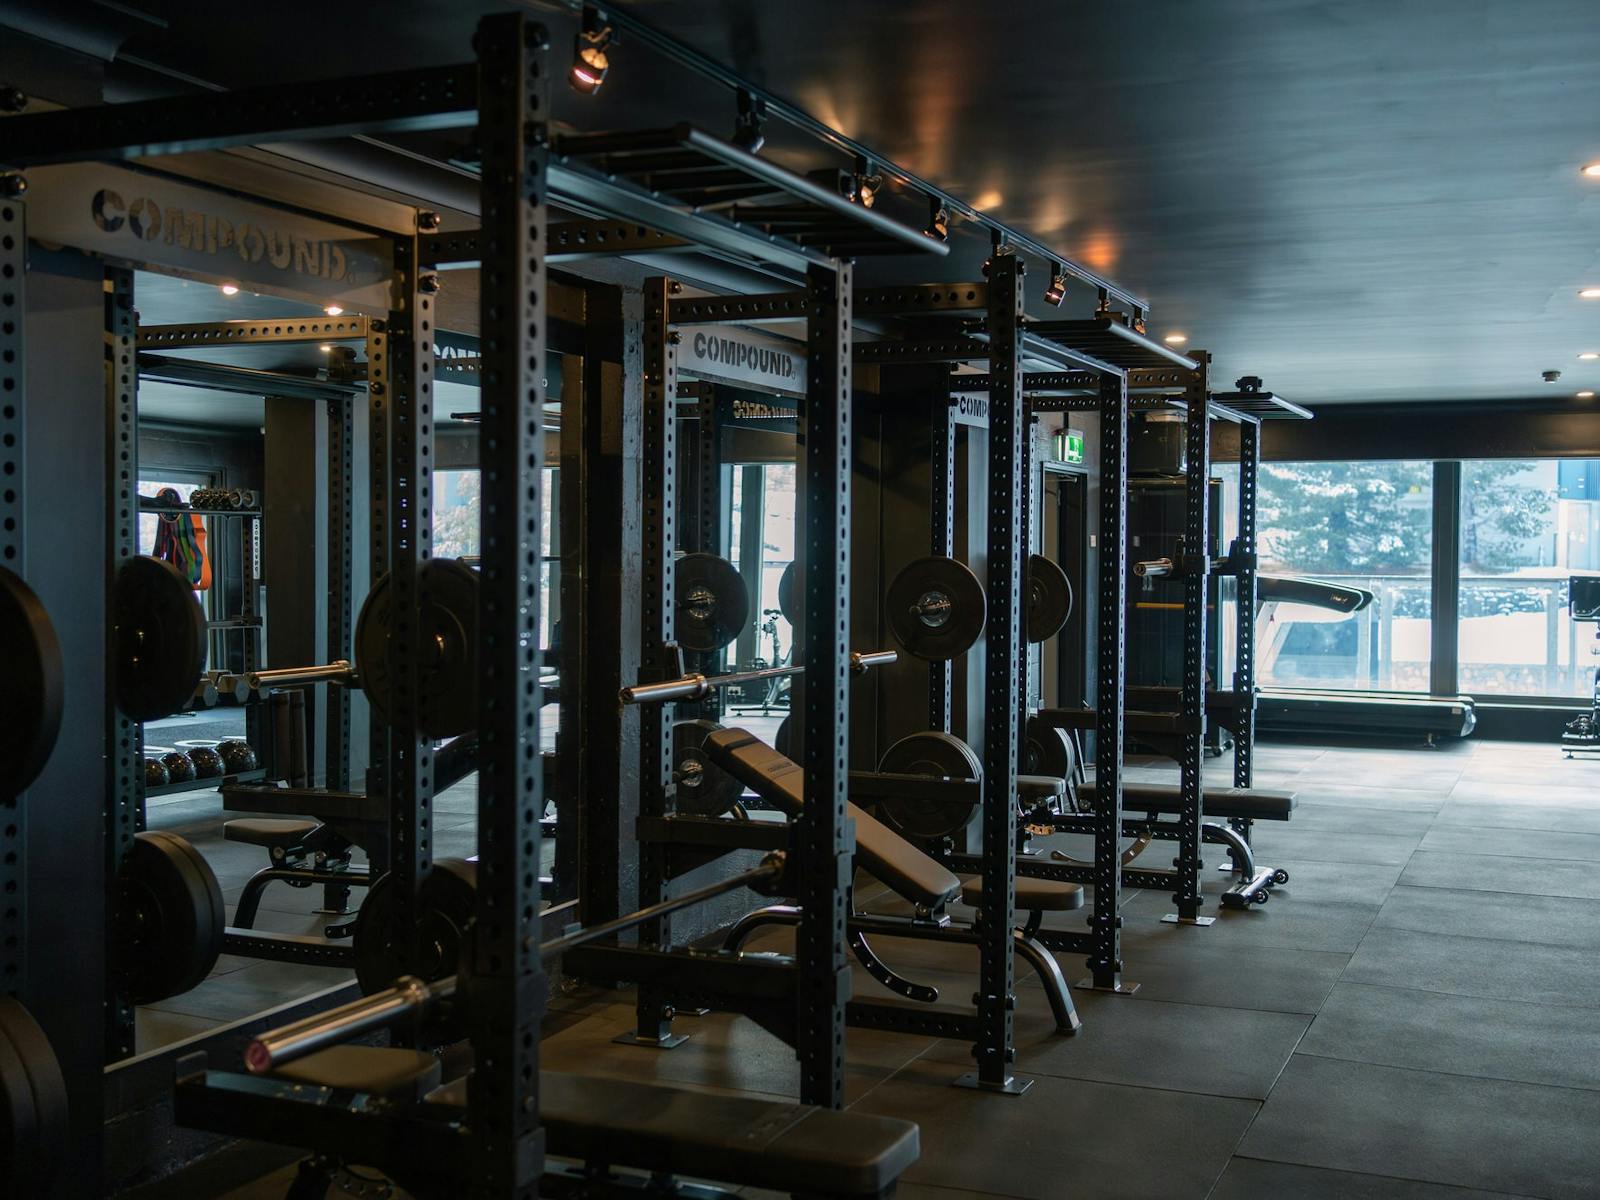 Compound Fitness Power Racks and benches